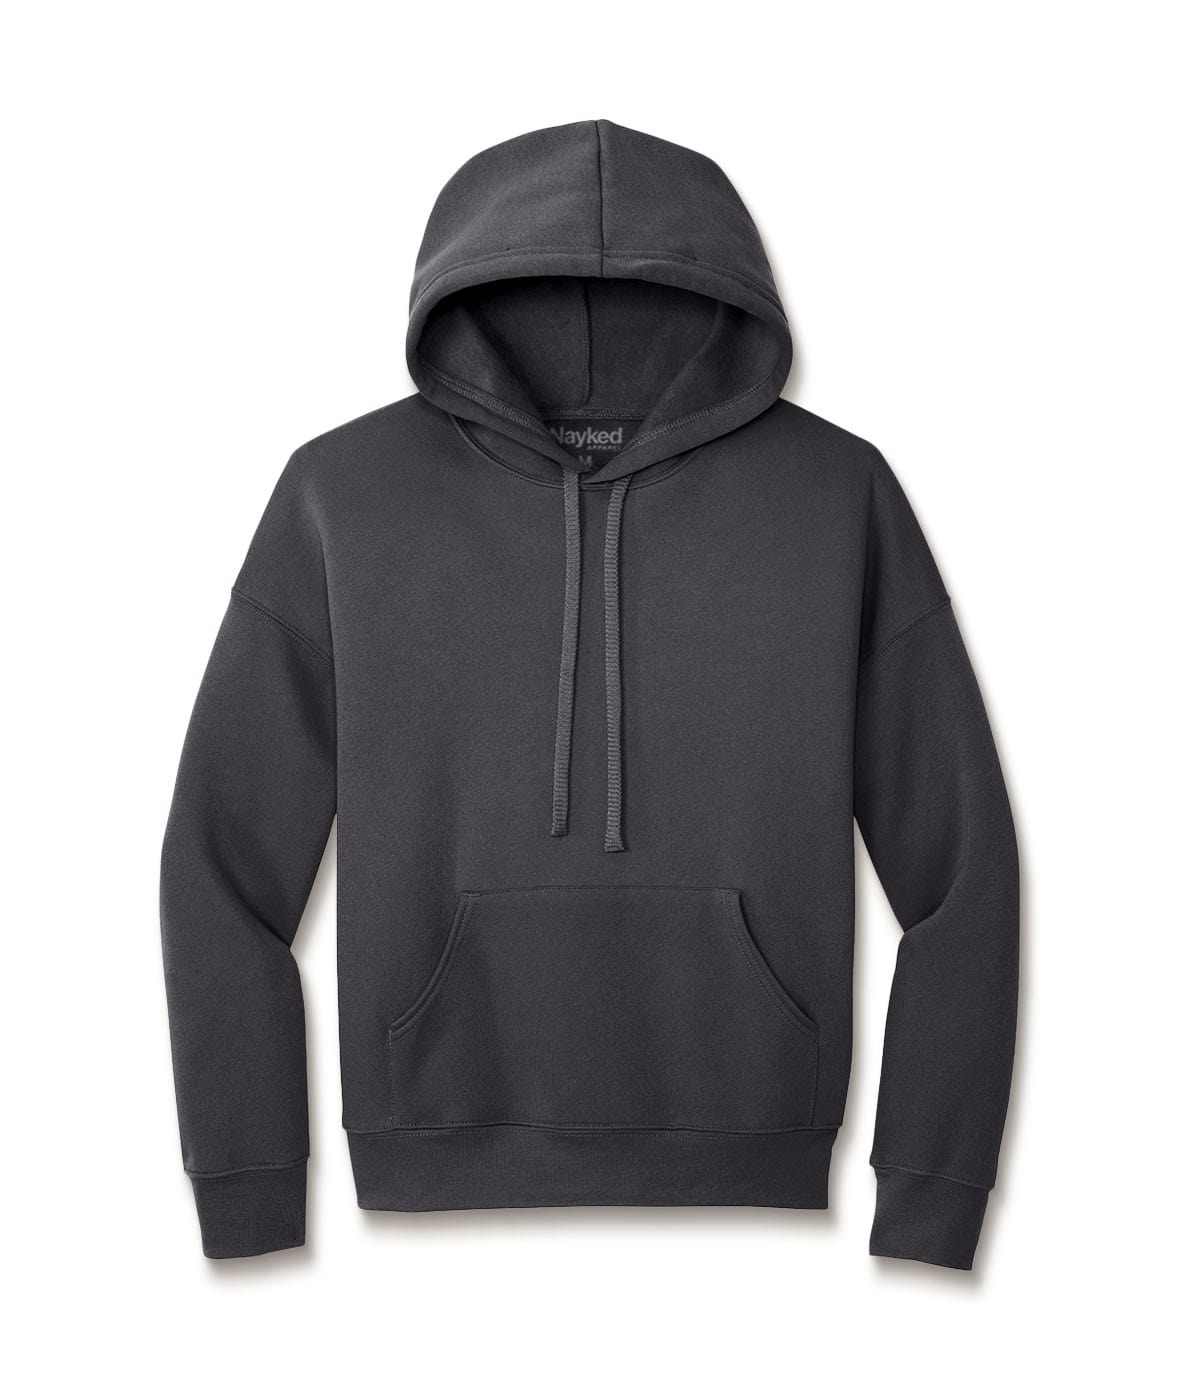 zij is Wrijven Beukende Ridiculously Soft Fleece Pullover Hoodie | Mens Soft T Shirts - Nayked  Apparel